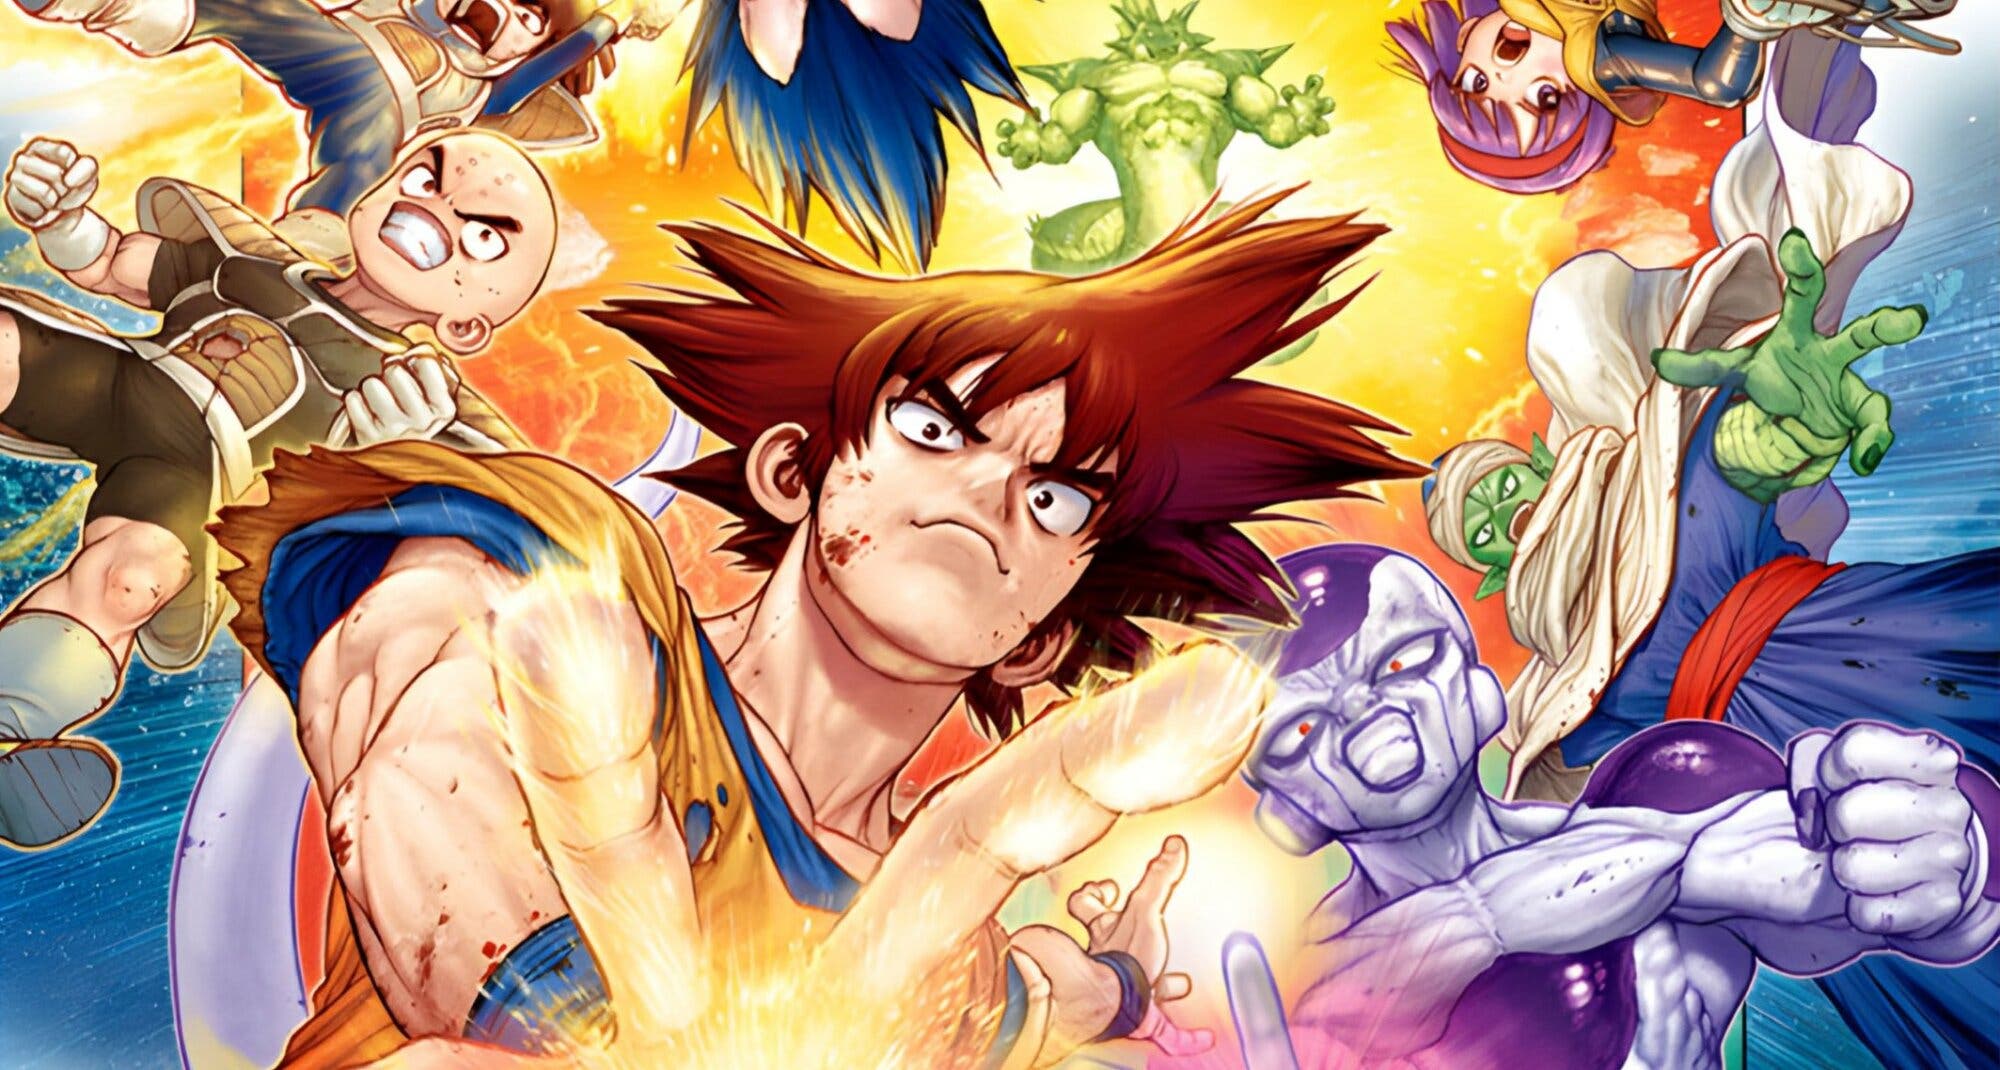 This is the last official cover of Dragon Ball and these are the reasons